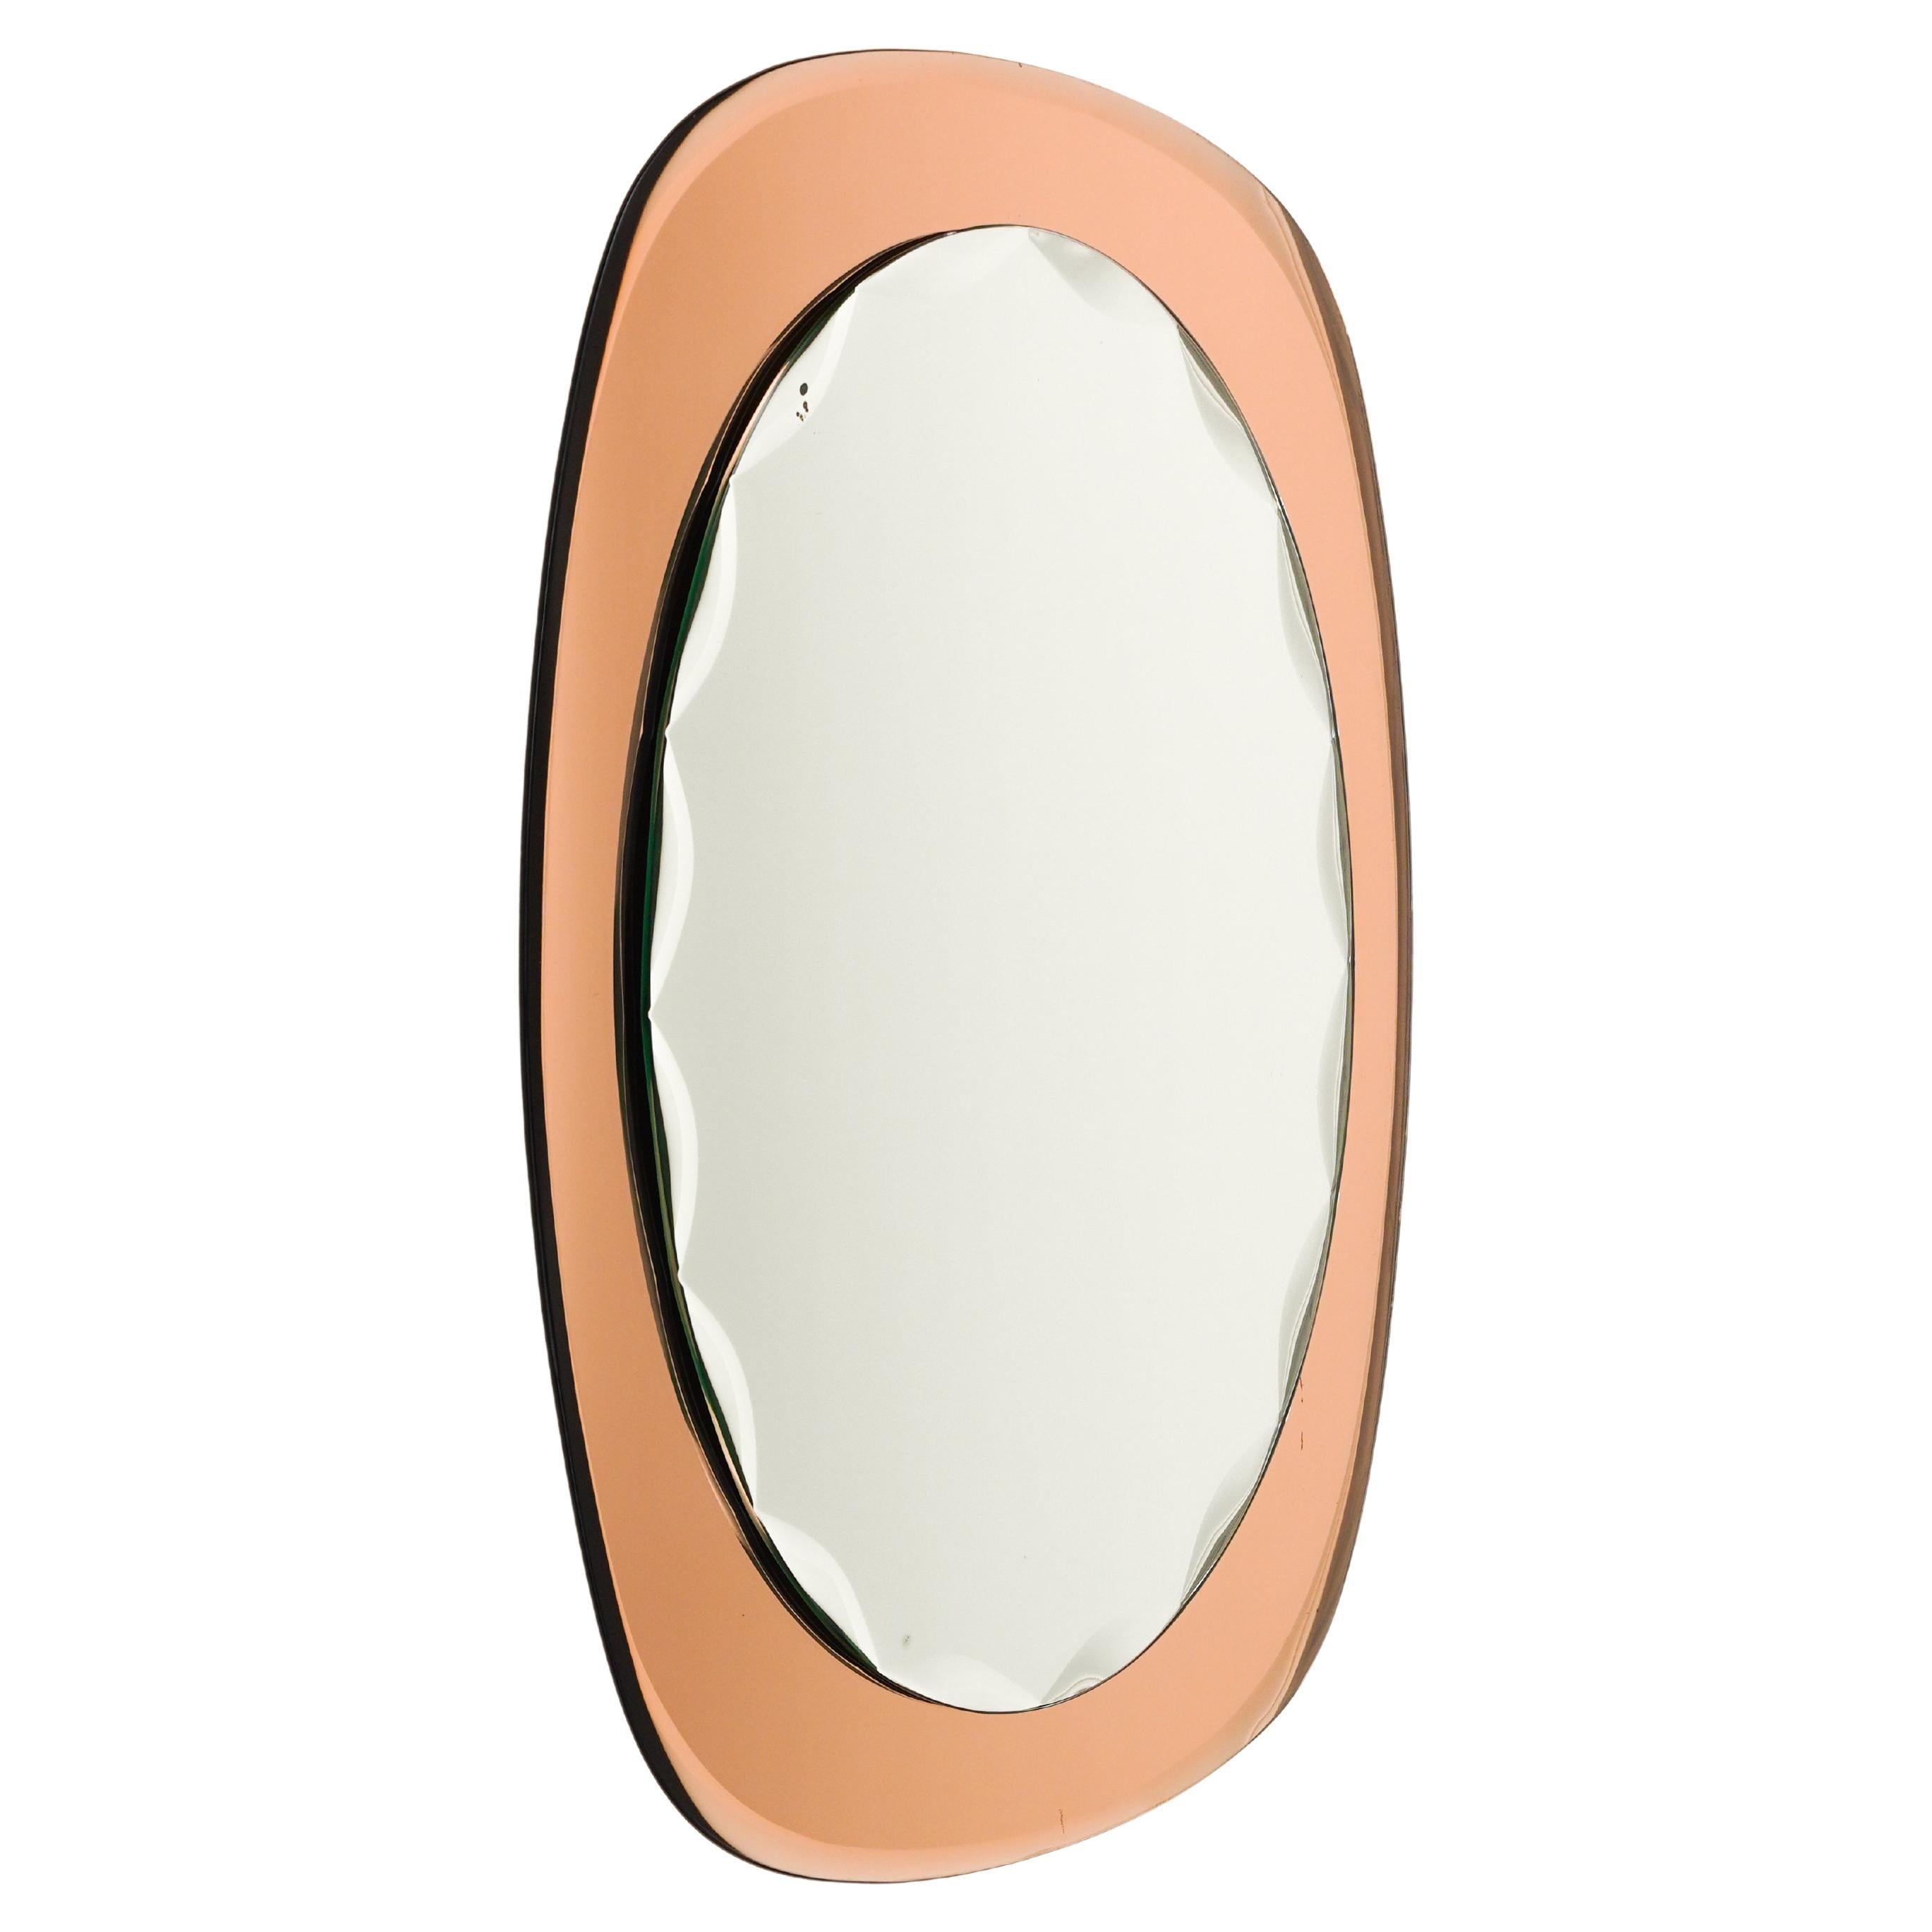 Midcentury Oval Wall Mirror rose gold Glass Frame by Cristal Arte, Italy 1960s